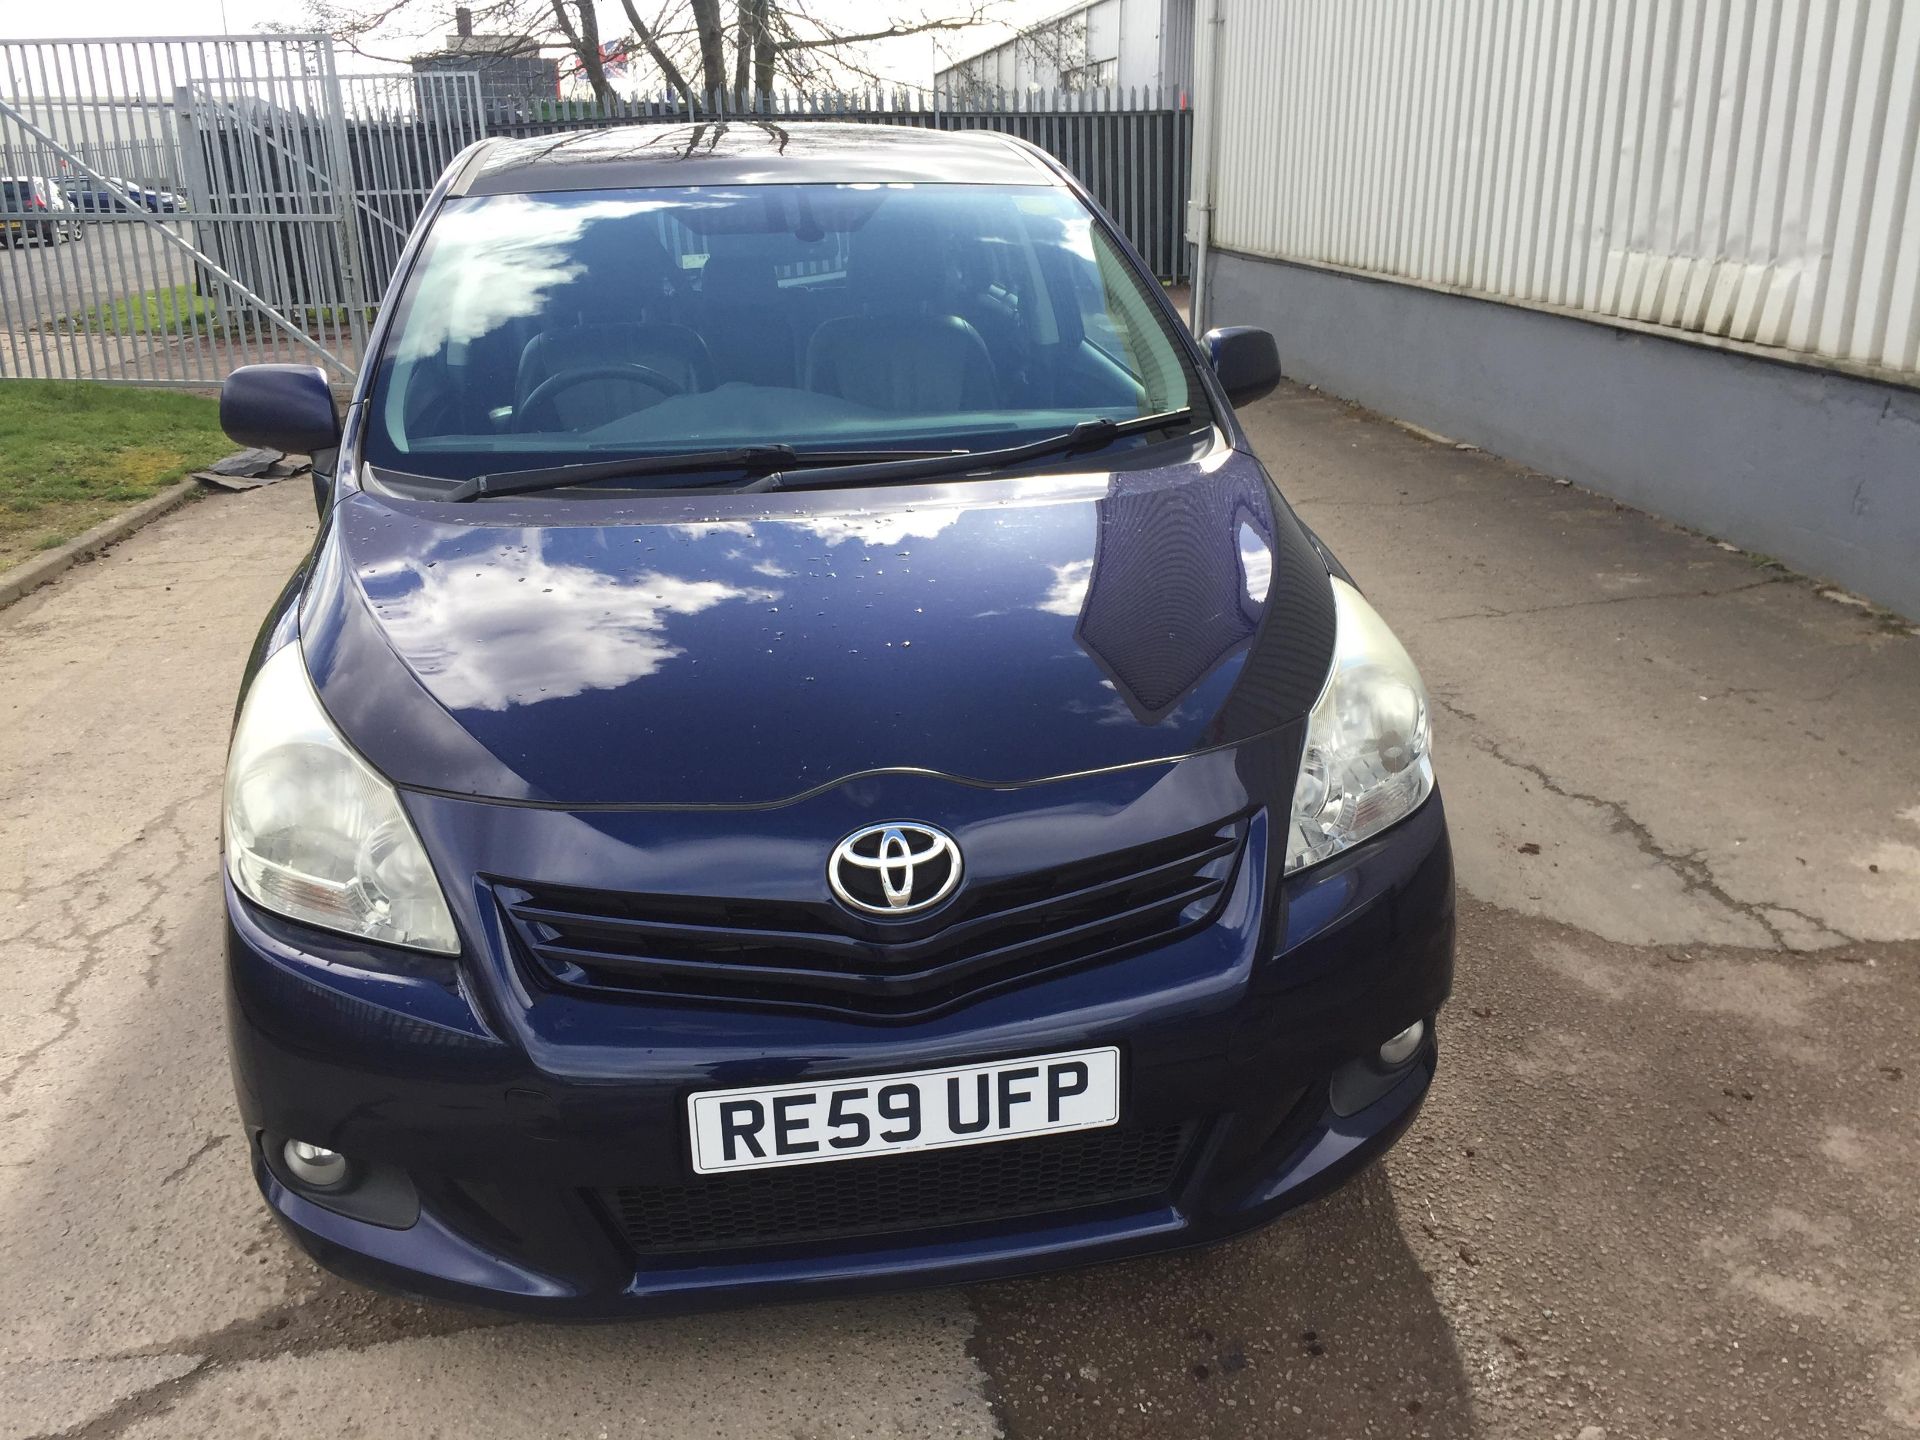 2009 Toyota Verso T spirit D-4D 2.0 5Dr MPV - CL505 - NO VAT ON THE HAMMER - Locatio - Image 3 of 24